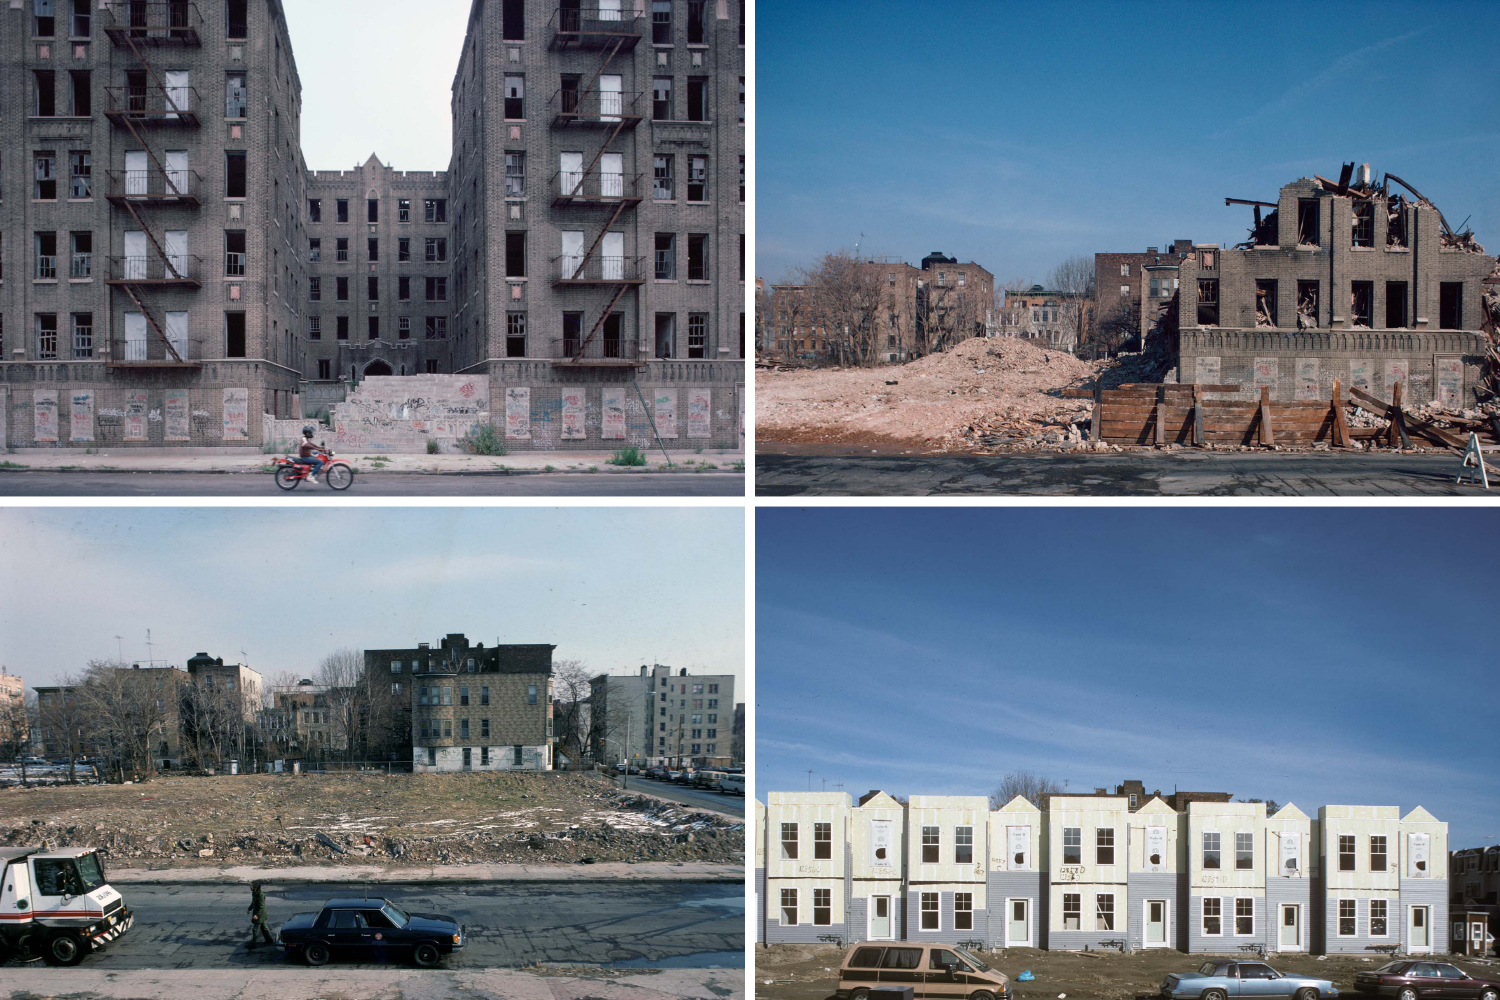 From top left: Vyse Ave at East 178th St., S. Bronx, N.Y., September 1984; Vyse Ave at East 178th St., S. Bronx, N.Y., January 1986; Vyse Ave at East 178th St., S. Bronx, N.Y., March 1988; Vyse Ave at East 178th St., S. Bronx, N.Y., May 1991.